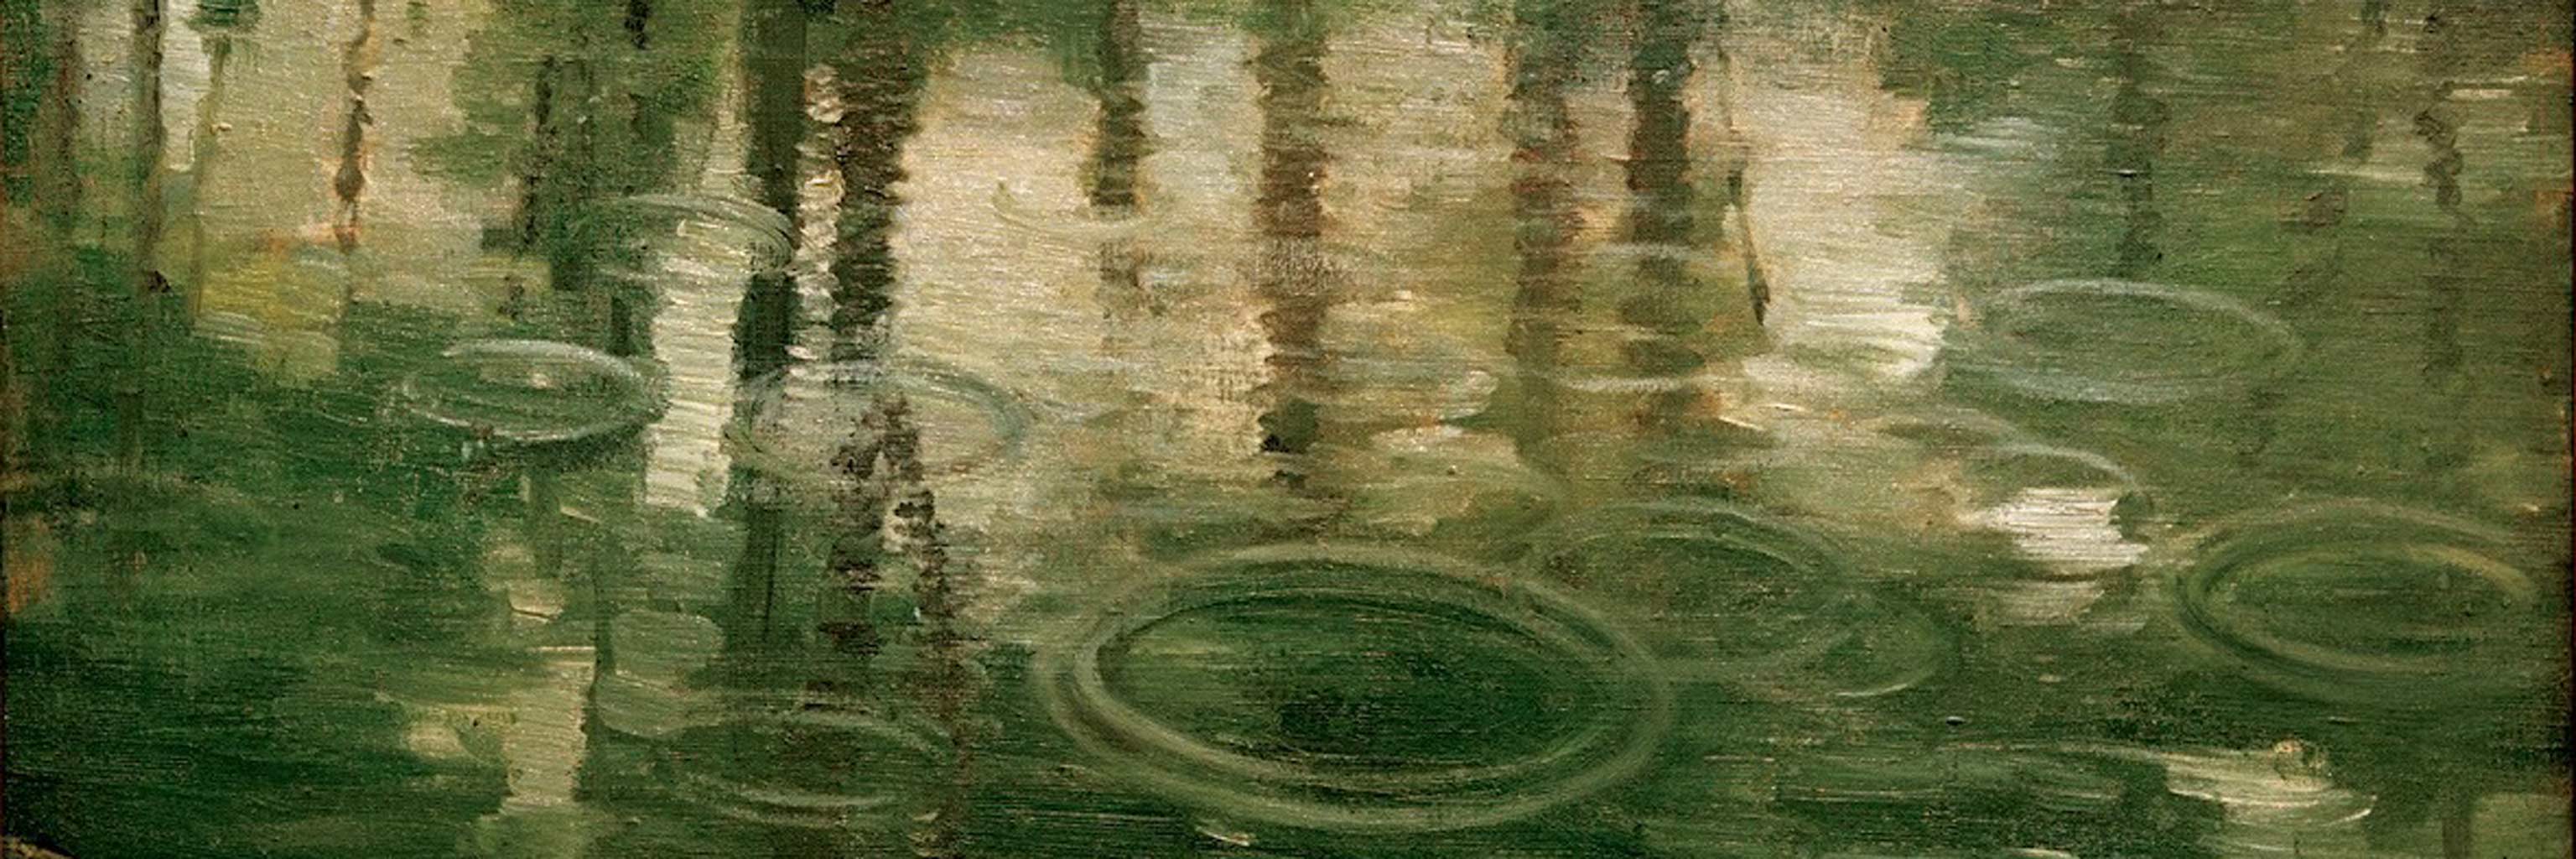 A painting depicting the surface of a pond.